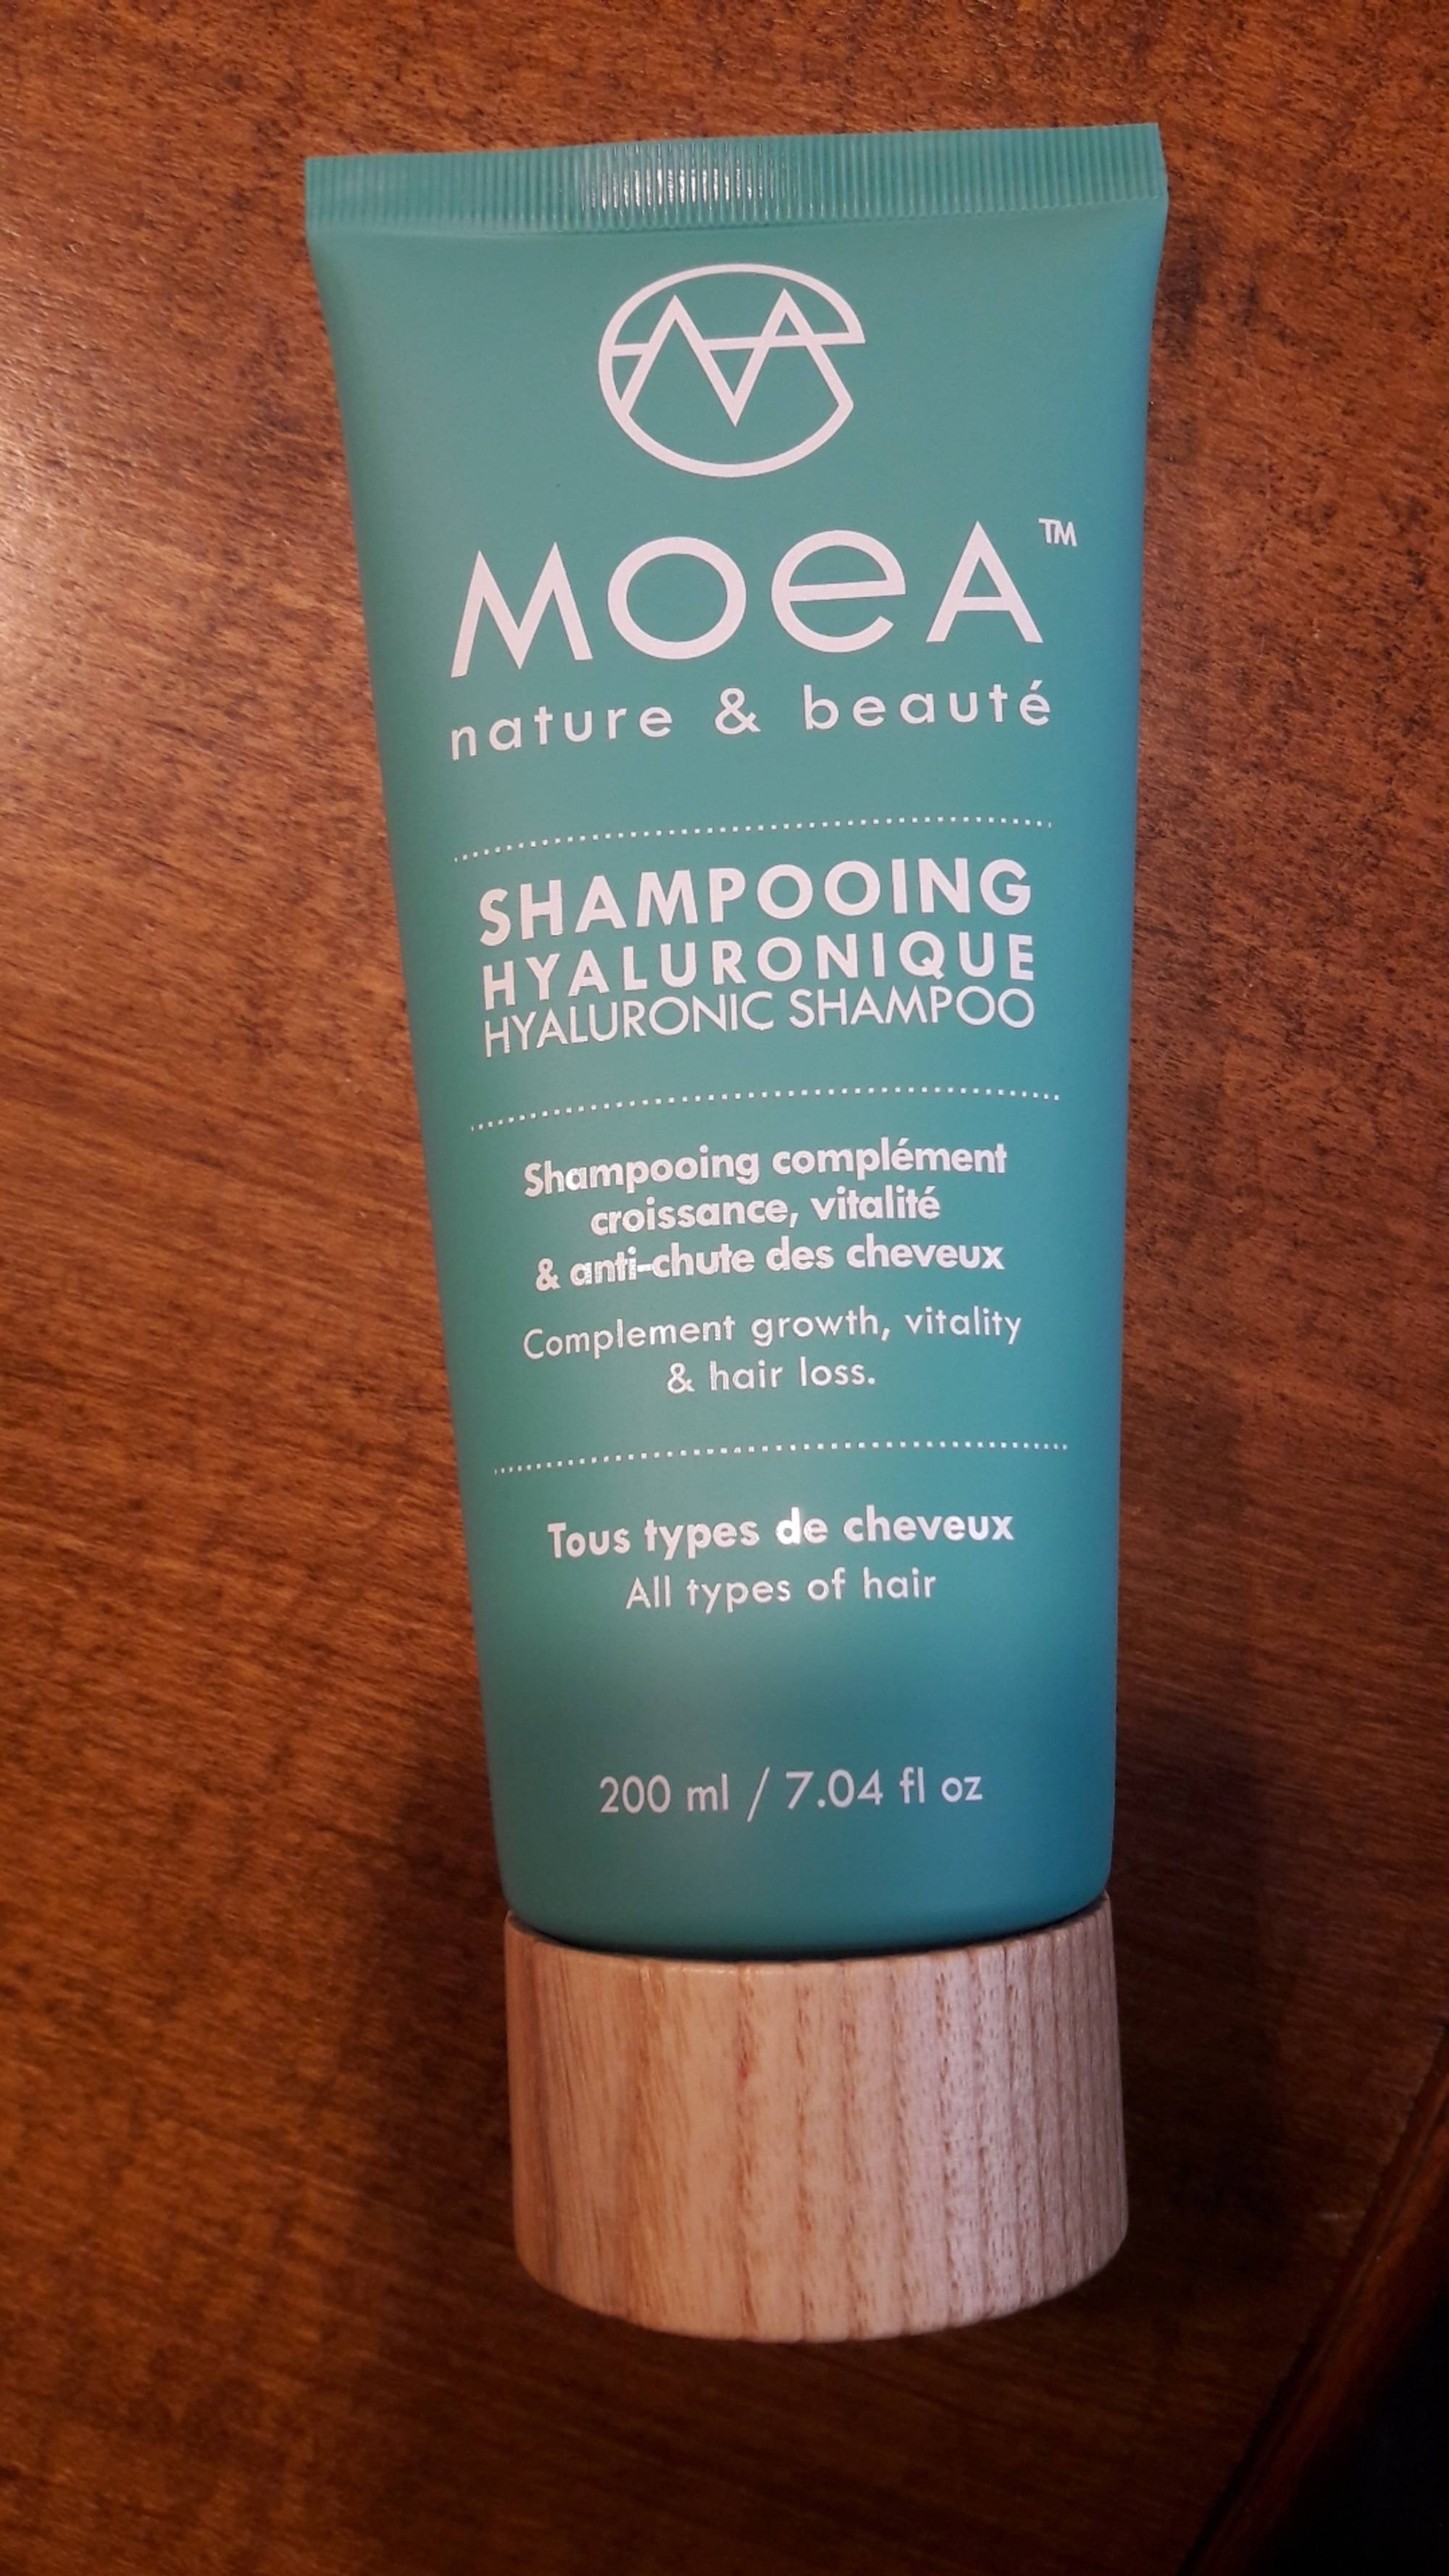 MOEA - Shampooing hyaluronique 